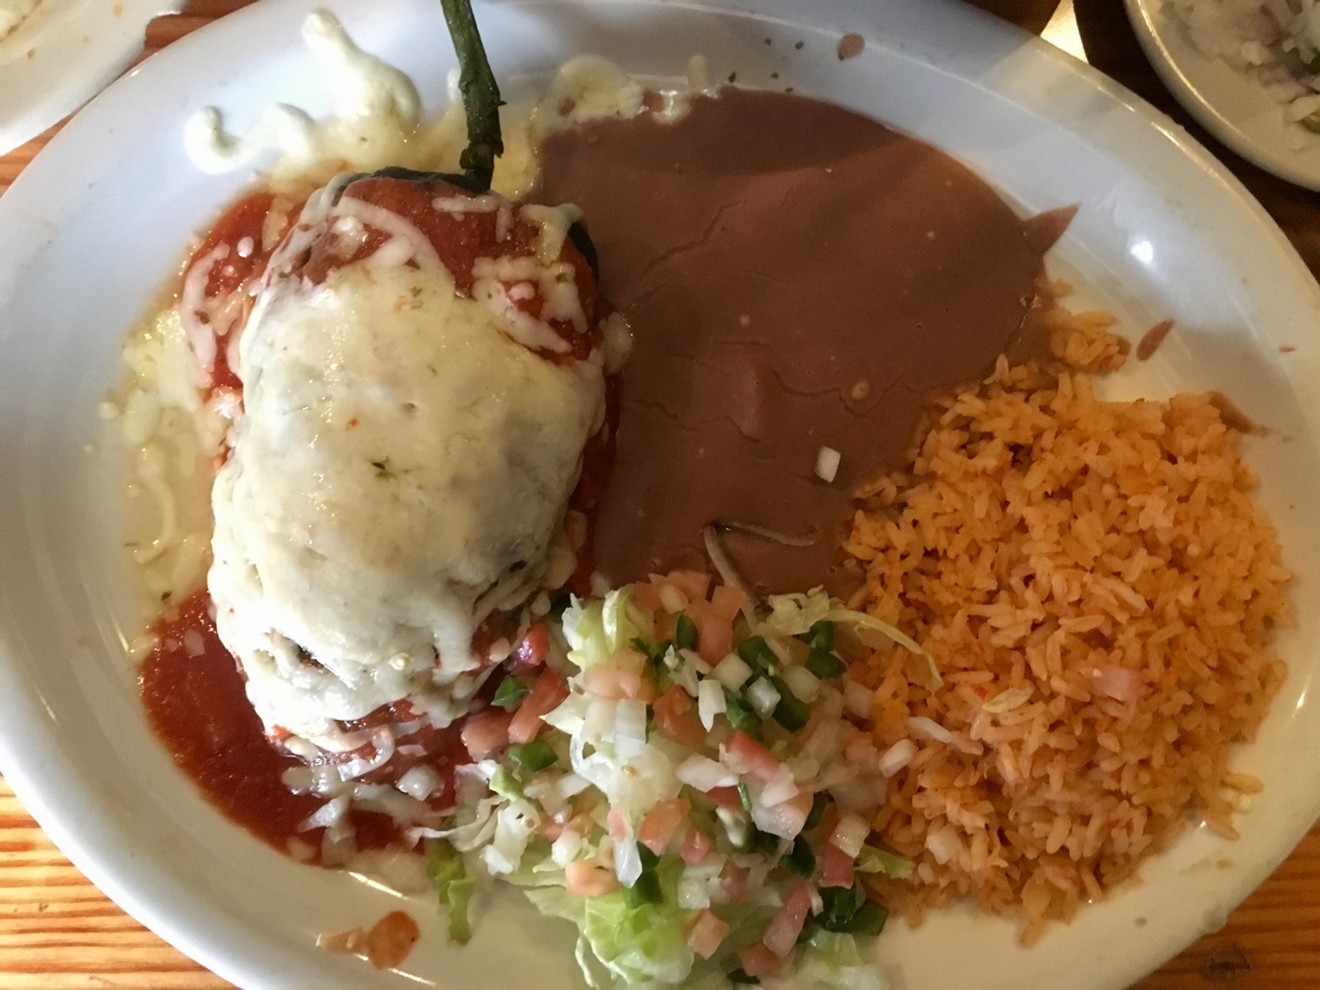 The chile relleno, stuffed with brisket, is one of the best Tex-Mex dishes in the city ($12.95).